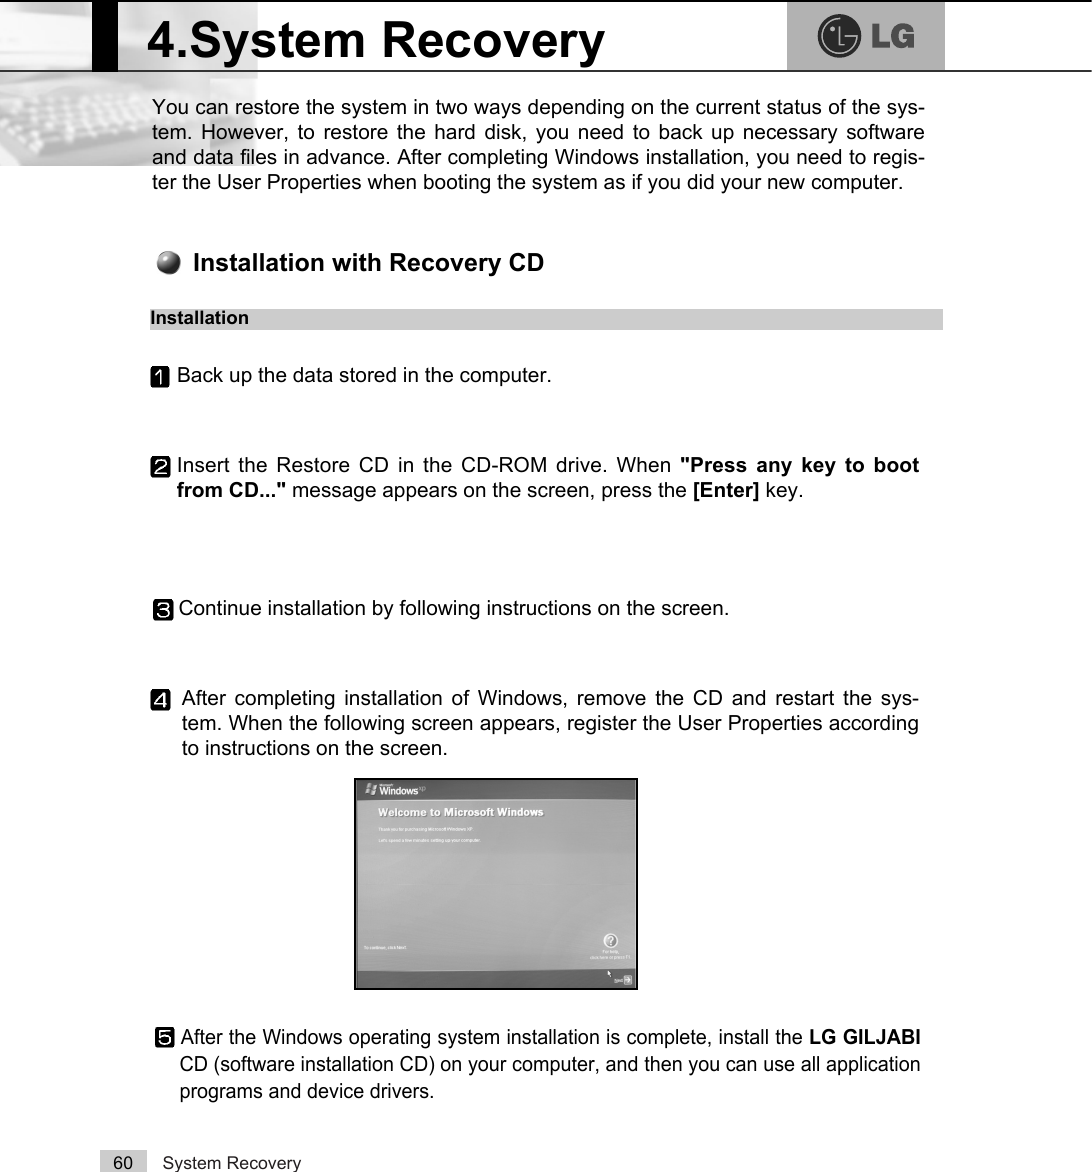 System Recovery60You can restore the system in two ways depending on the current status of the sys-tem. However, to restore the hard disk, you need to back up necessary softwareand data files in advance. After completing Windows installation, you need to regis-ter the User Properties when booting the system as if you did your new computer.4.System RecoveryBack up the data stored in the computer.Insert the Restore CD in the CD-ROM drive. When &quot;Press any key to bootfrom CD...&quot; message appears on the screen, press the [Enter] key. Continue installation by following instructions on the screen. After completing installation of Windows, remove the CD and restart the sys-tem. When the following screen appears, register the User Properties accordingto instructions on the screen. Installation with Recovery CDInstallationAfter the Windows operating system installation is complete, install the LG GILJABICD (software installation CD) on your computer, and then you can use all applicationprograms and device drivers. 